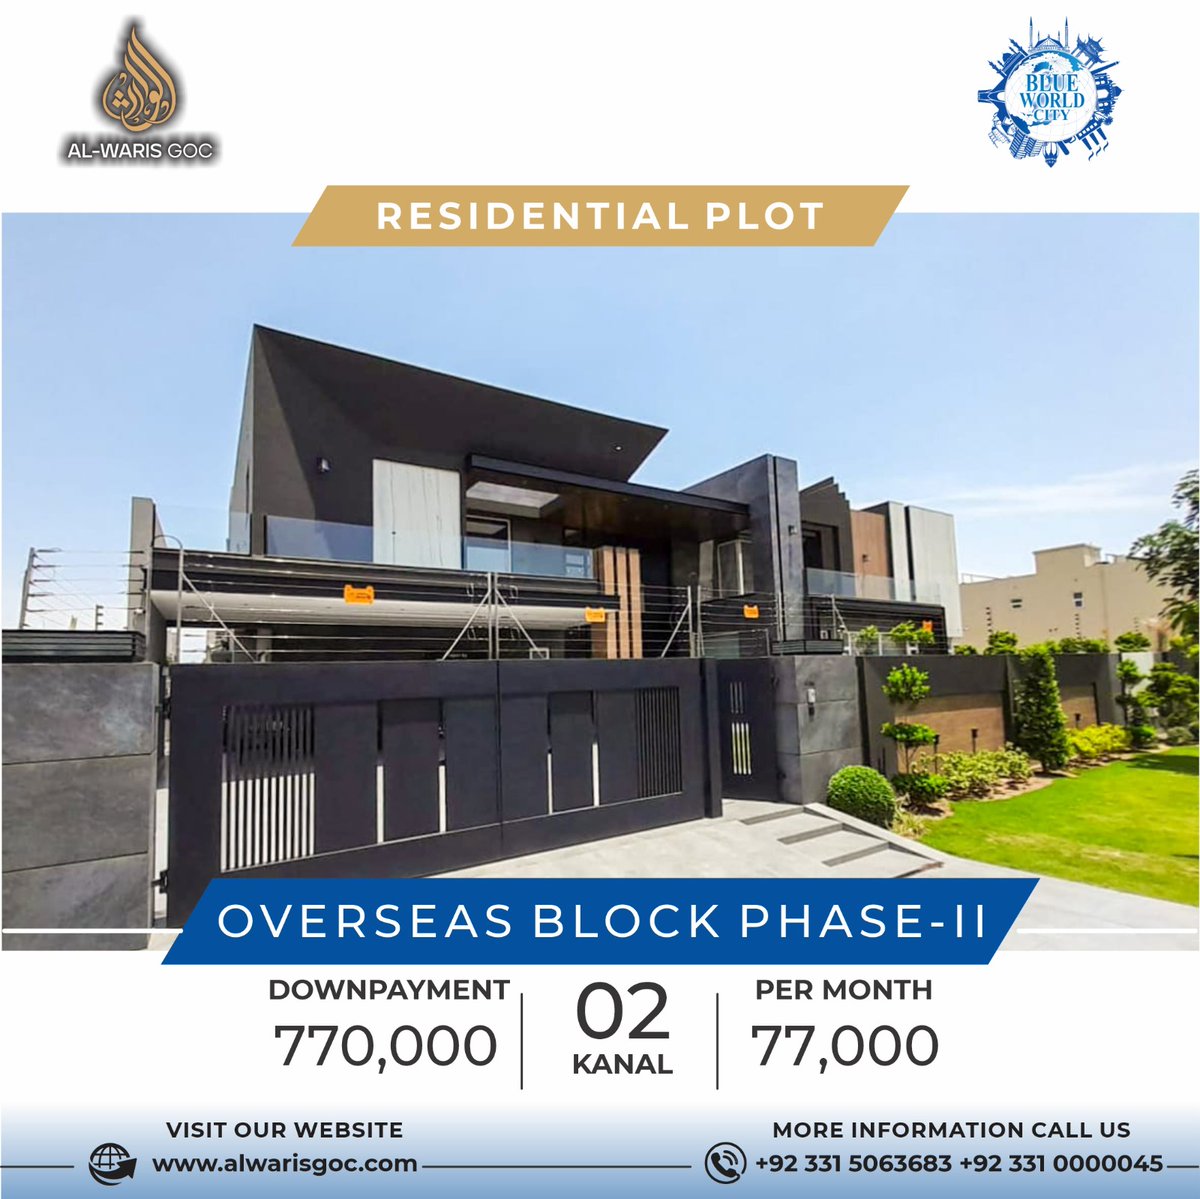 Your Dreamland awaits in 𝐁𝐥𝐮𝐞 𝐖𝐨𝐫𝐥𝐝 𝐂𝐢𝐭𝐲, invest in your future today 𝐎𝐯𝐞𝐫𝐬𝐞𝐚𝐬 𝐁𝐥𝐨𝐜𝐤 𝐏𝐡𝐚𝐬𝐞 𝟐.
#blueworldcityislamabad #blueworldcity #blueworldcityoverseasblock #blueworldcityphase2 #ResidentialPlots #Residentialplotforsale #property #overseasblock